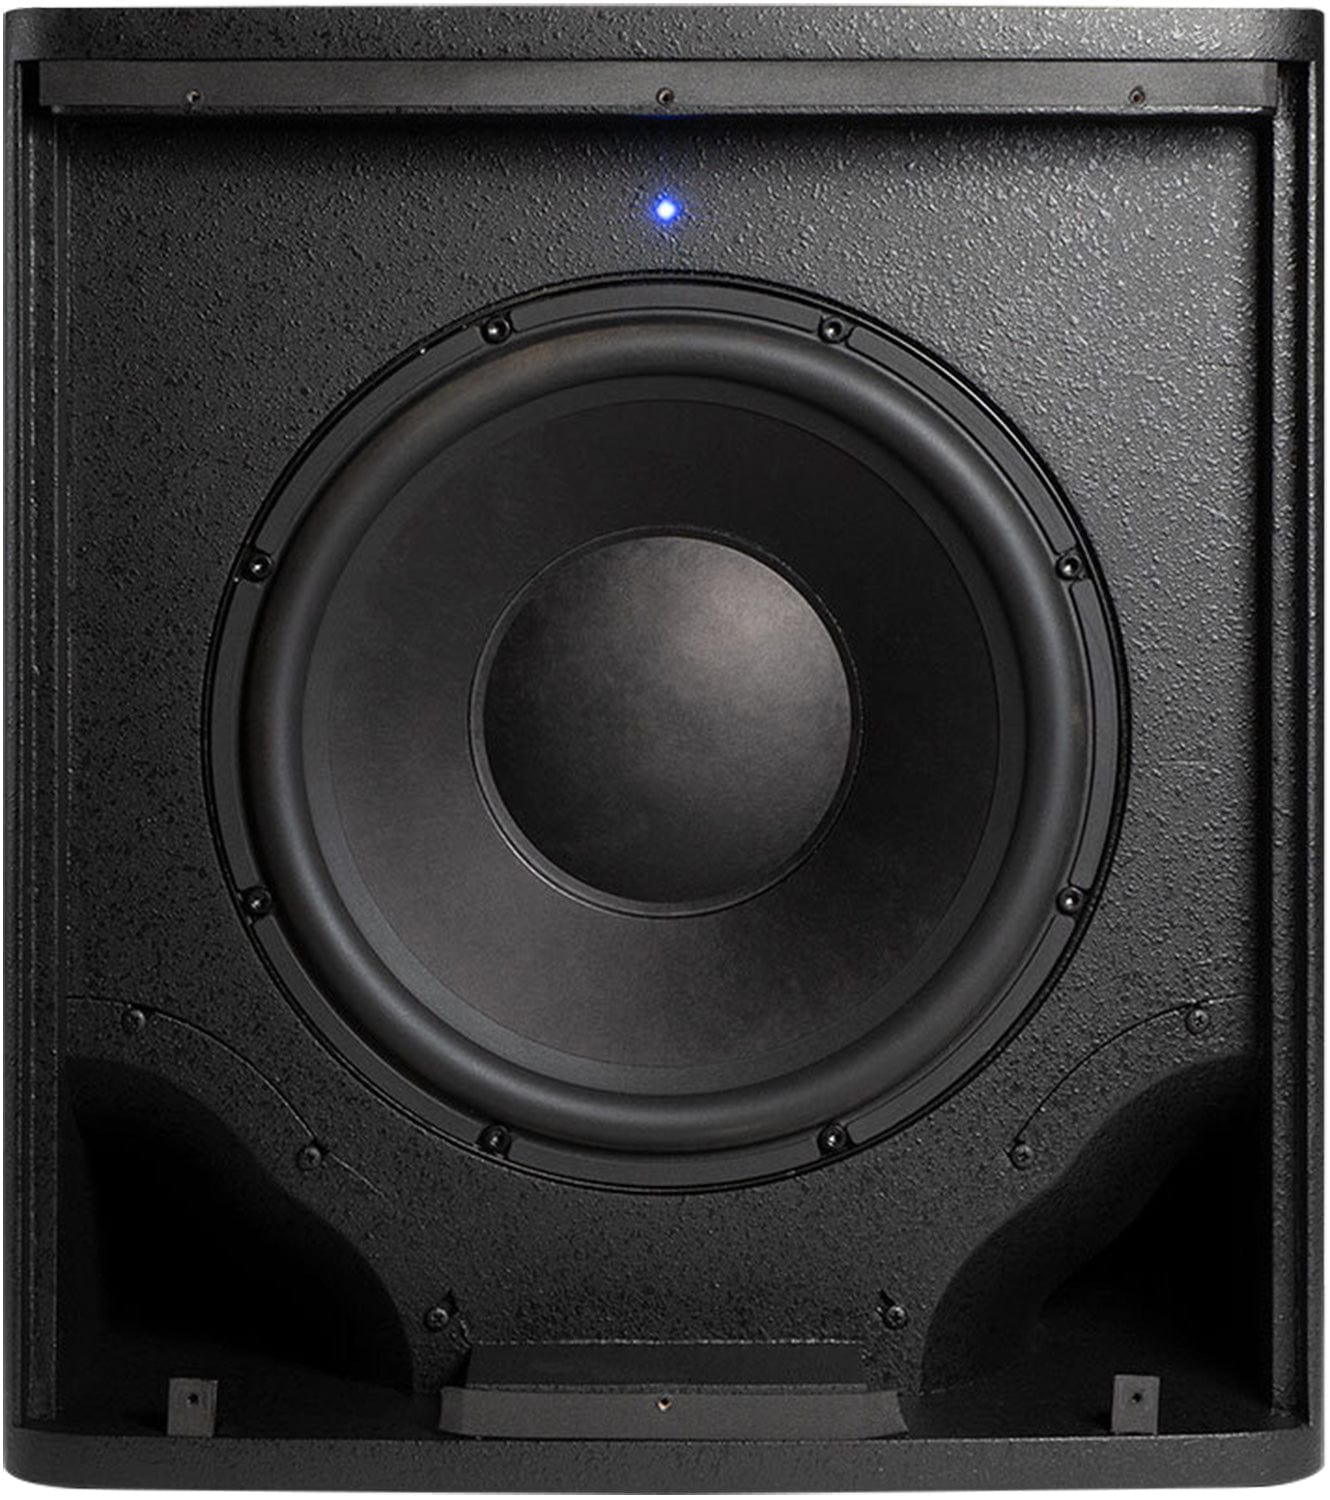 Kali Audio WS-12 12-Inch Active Studio Subwoofer - PSSL ProSound and Stage Lighting